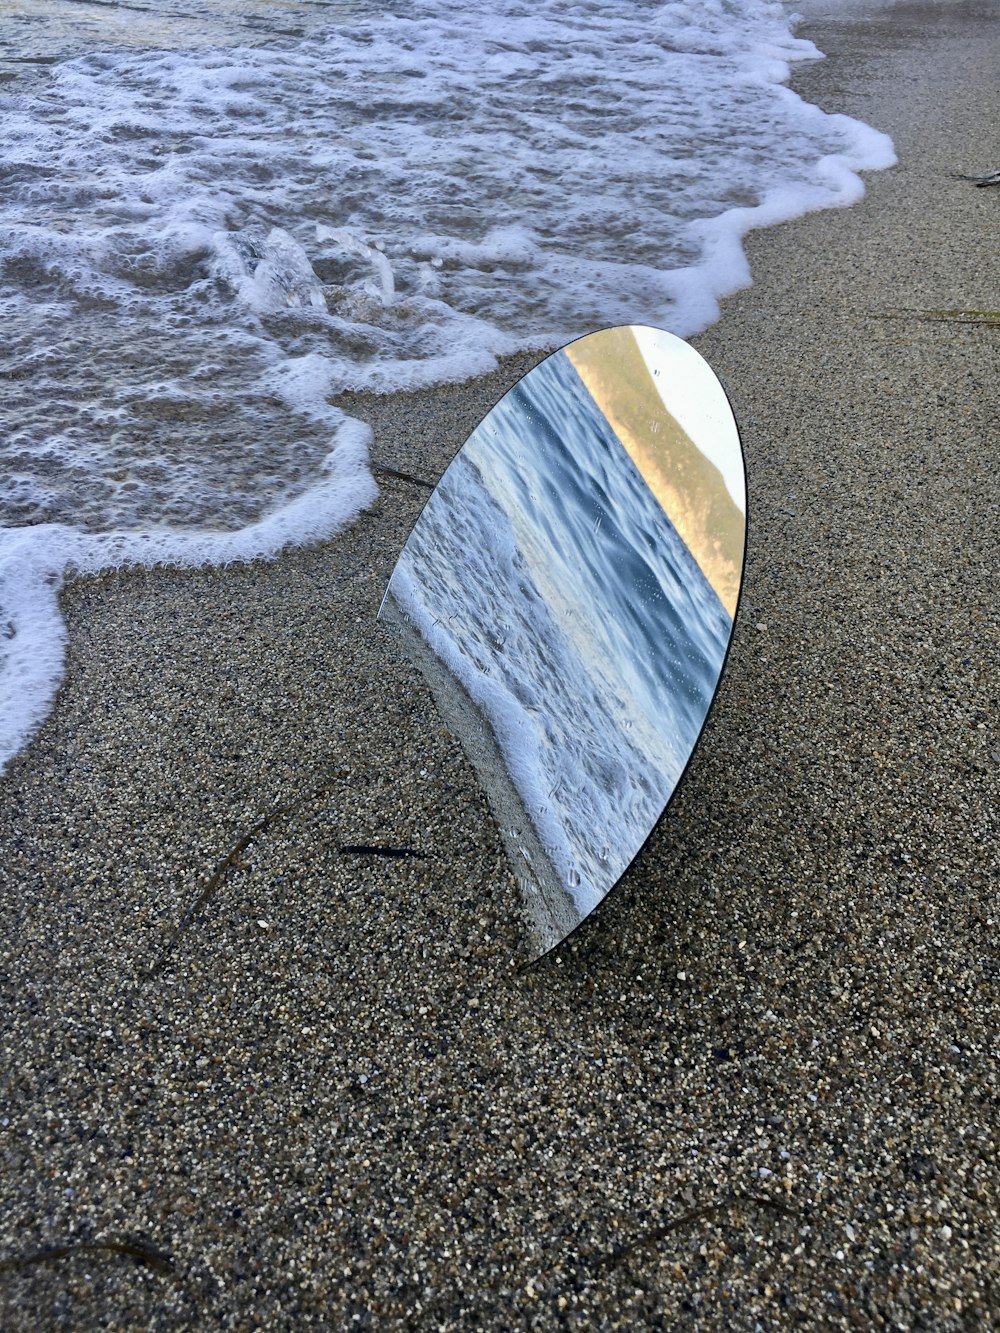 brown and white surfboard on beach shore during daytime